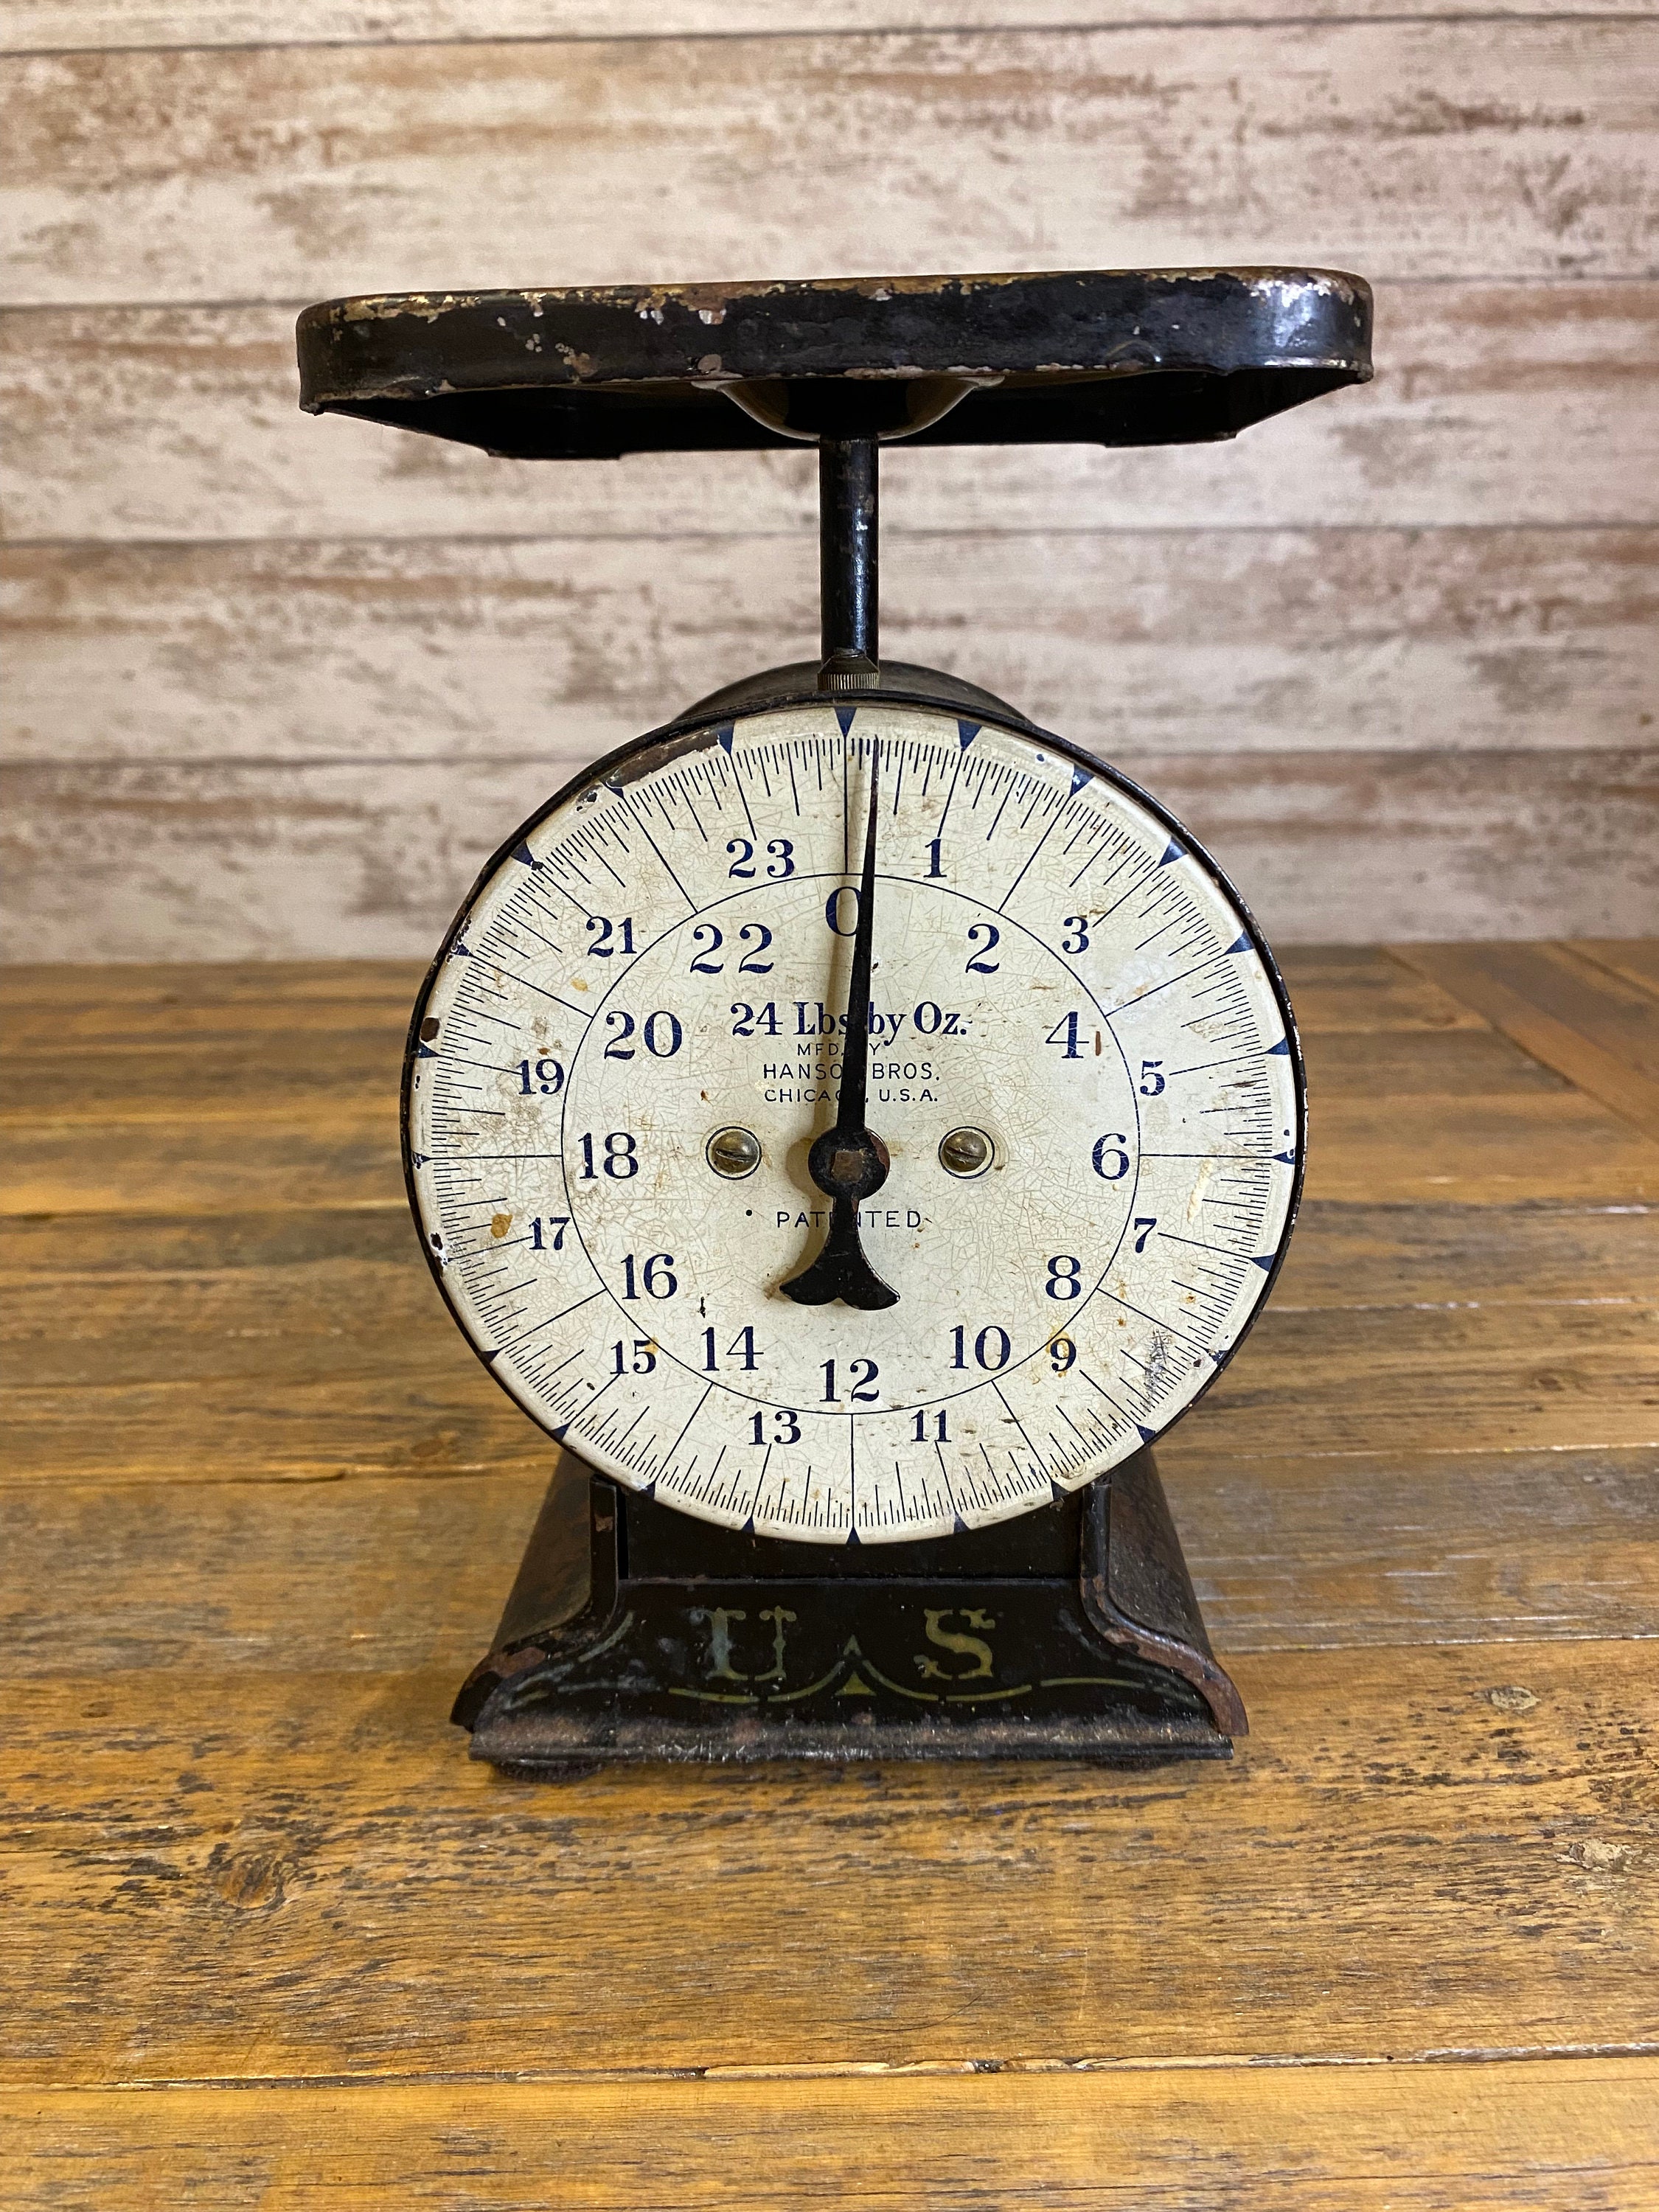 Vintage post office / postal scales - price guide and values